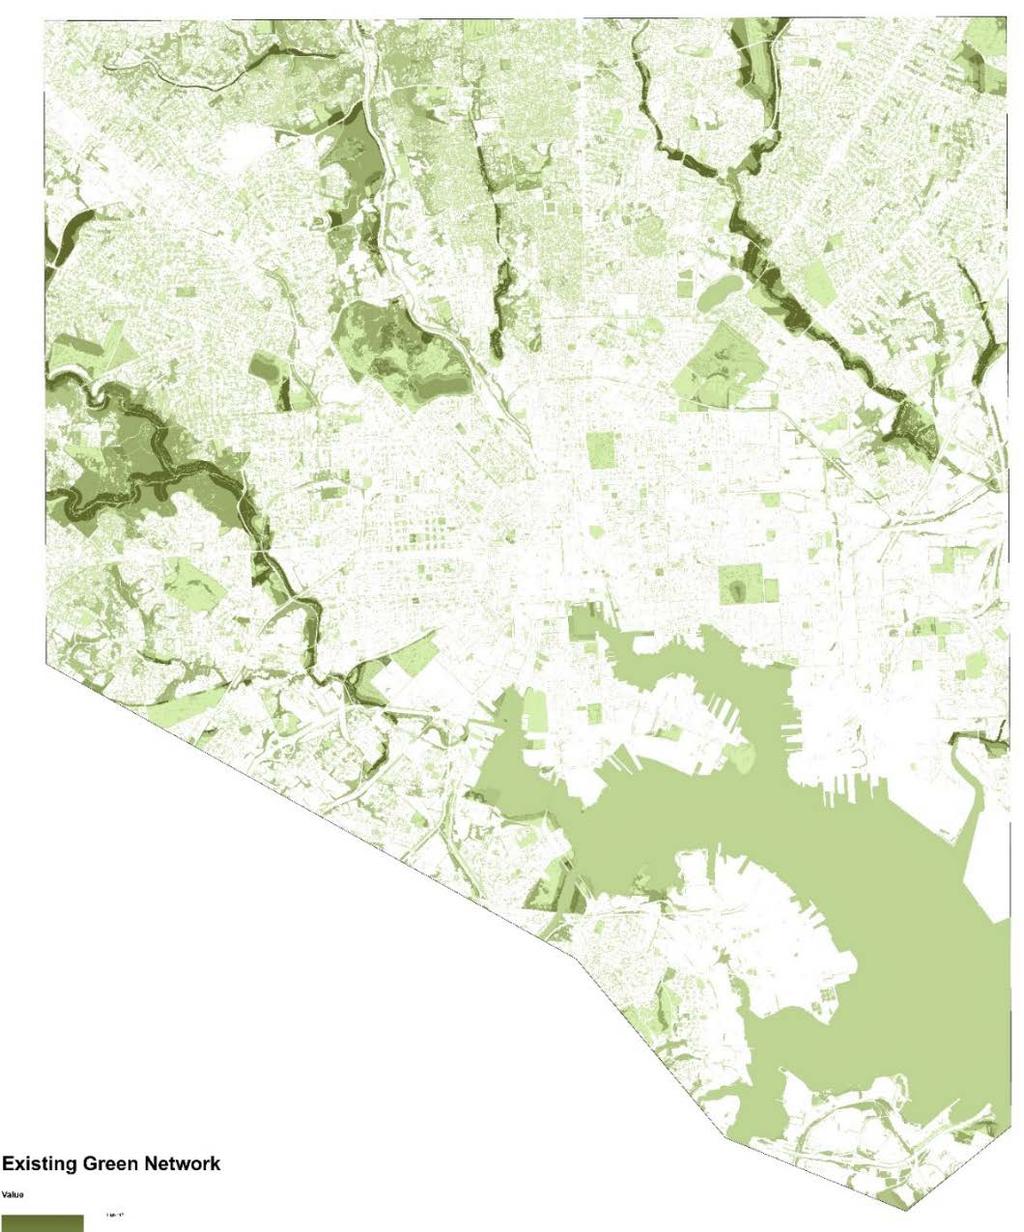 SETTING THE CONTEXT EXISTING GREEN NETWORK Environmental benefits and open space access already exist in many parts of Baltimore City, visible in this map of our existing green network spaces: parks,